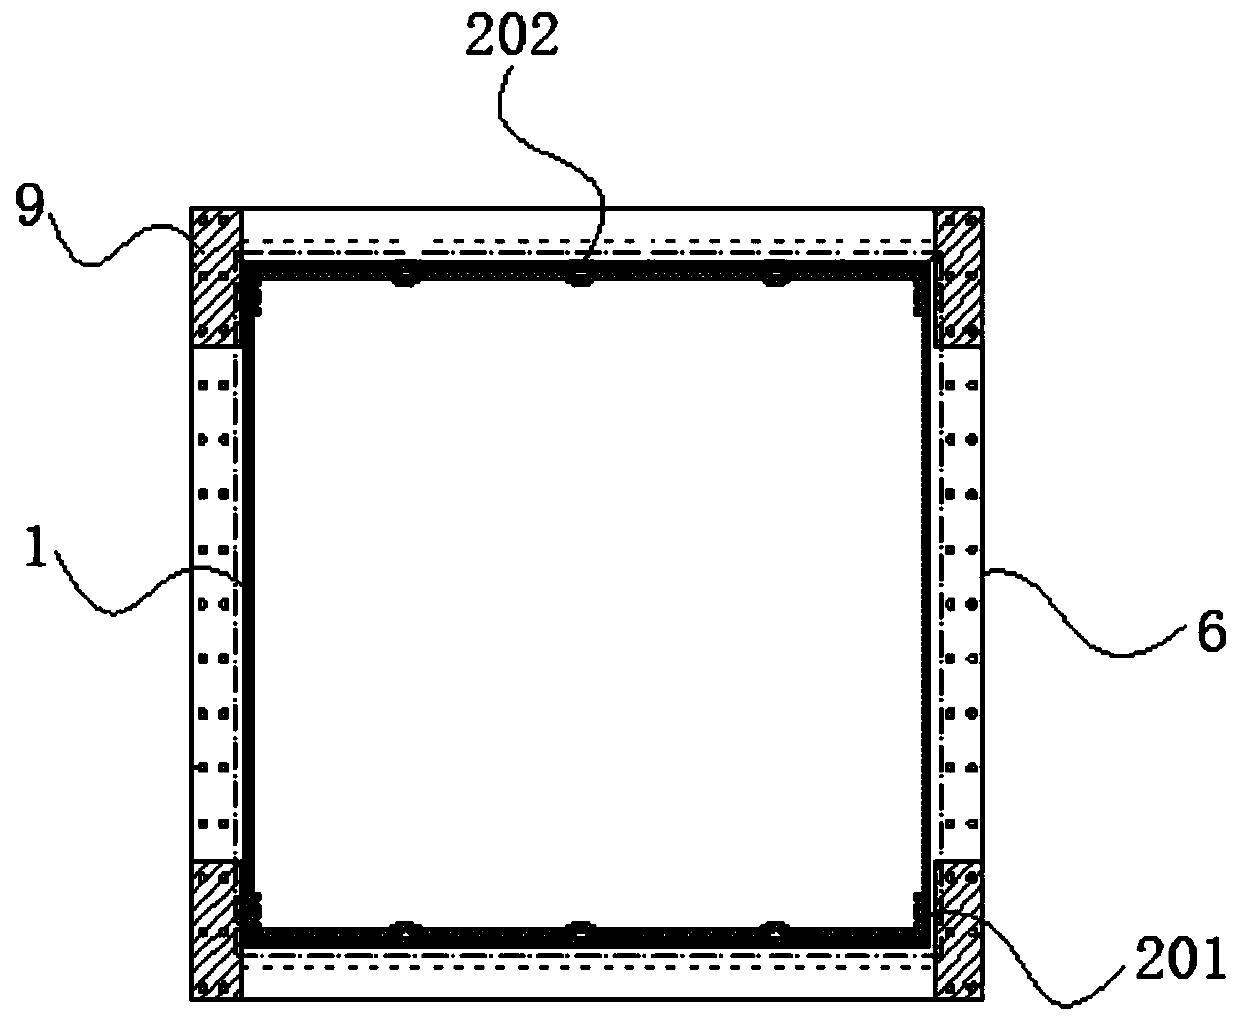 Pile and soil interaction visual testing device and method